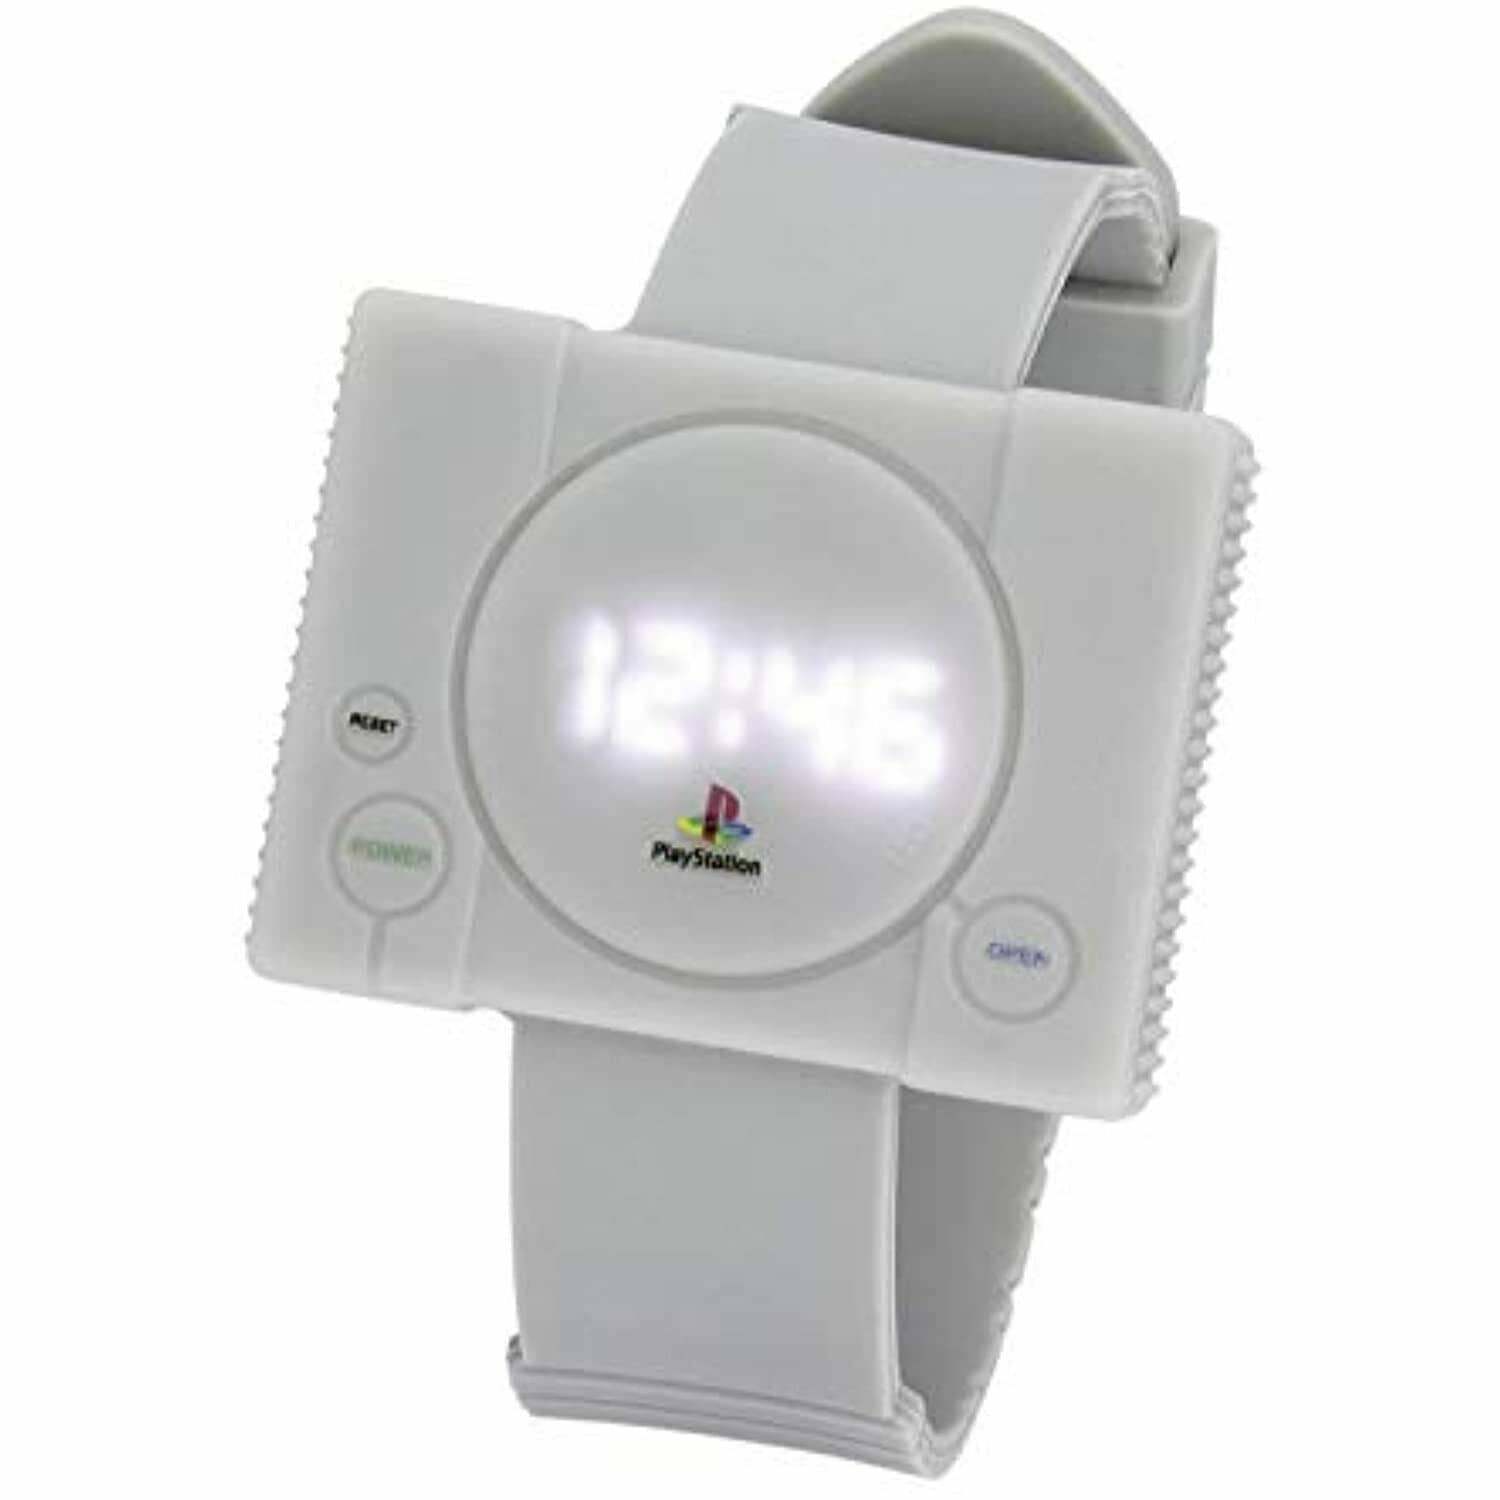 best gifts for gamers: PlayStation watch